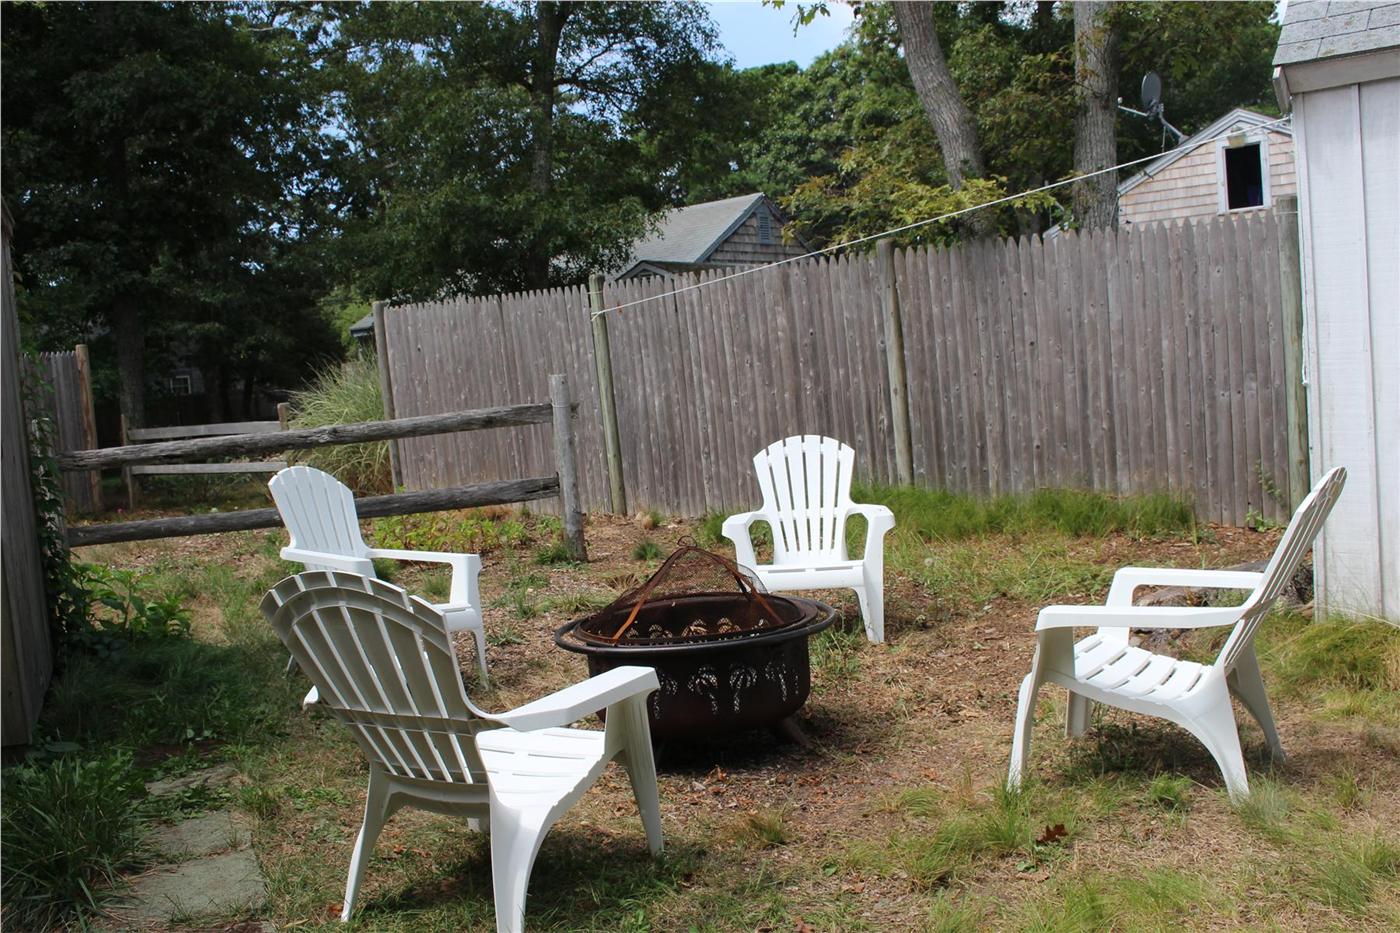 Dennis Vacation Rental Home In Cape Cod Ma 2 Minute Walk Down The